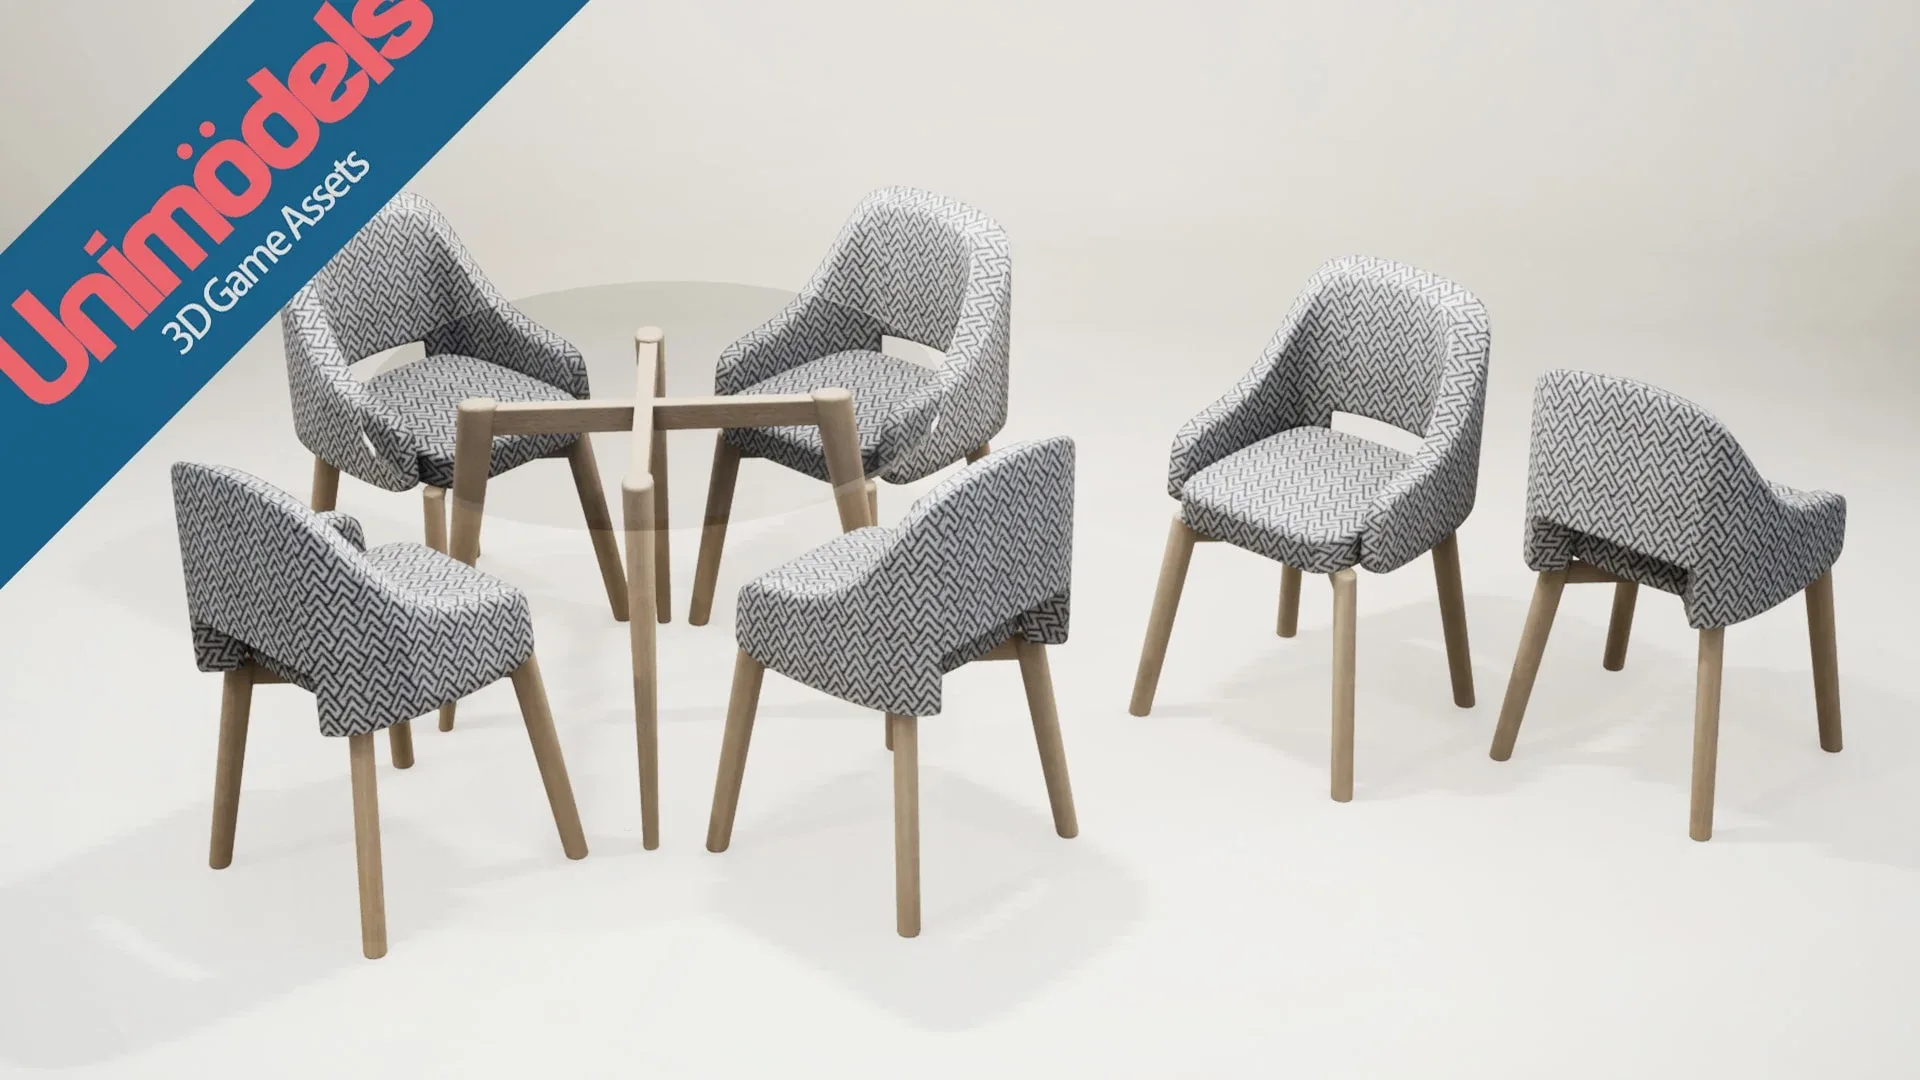 Unimodels Chairs & Tables Vol. 3 For Unity